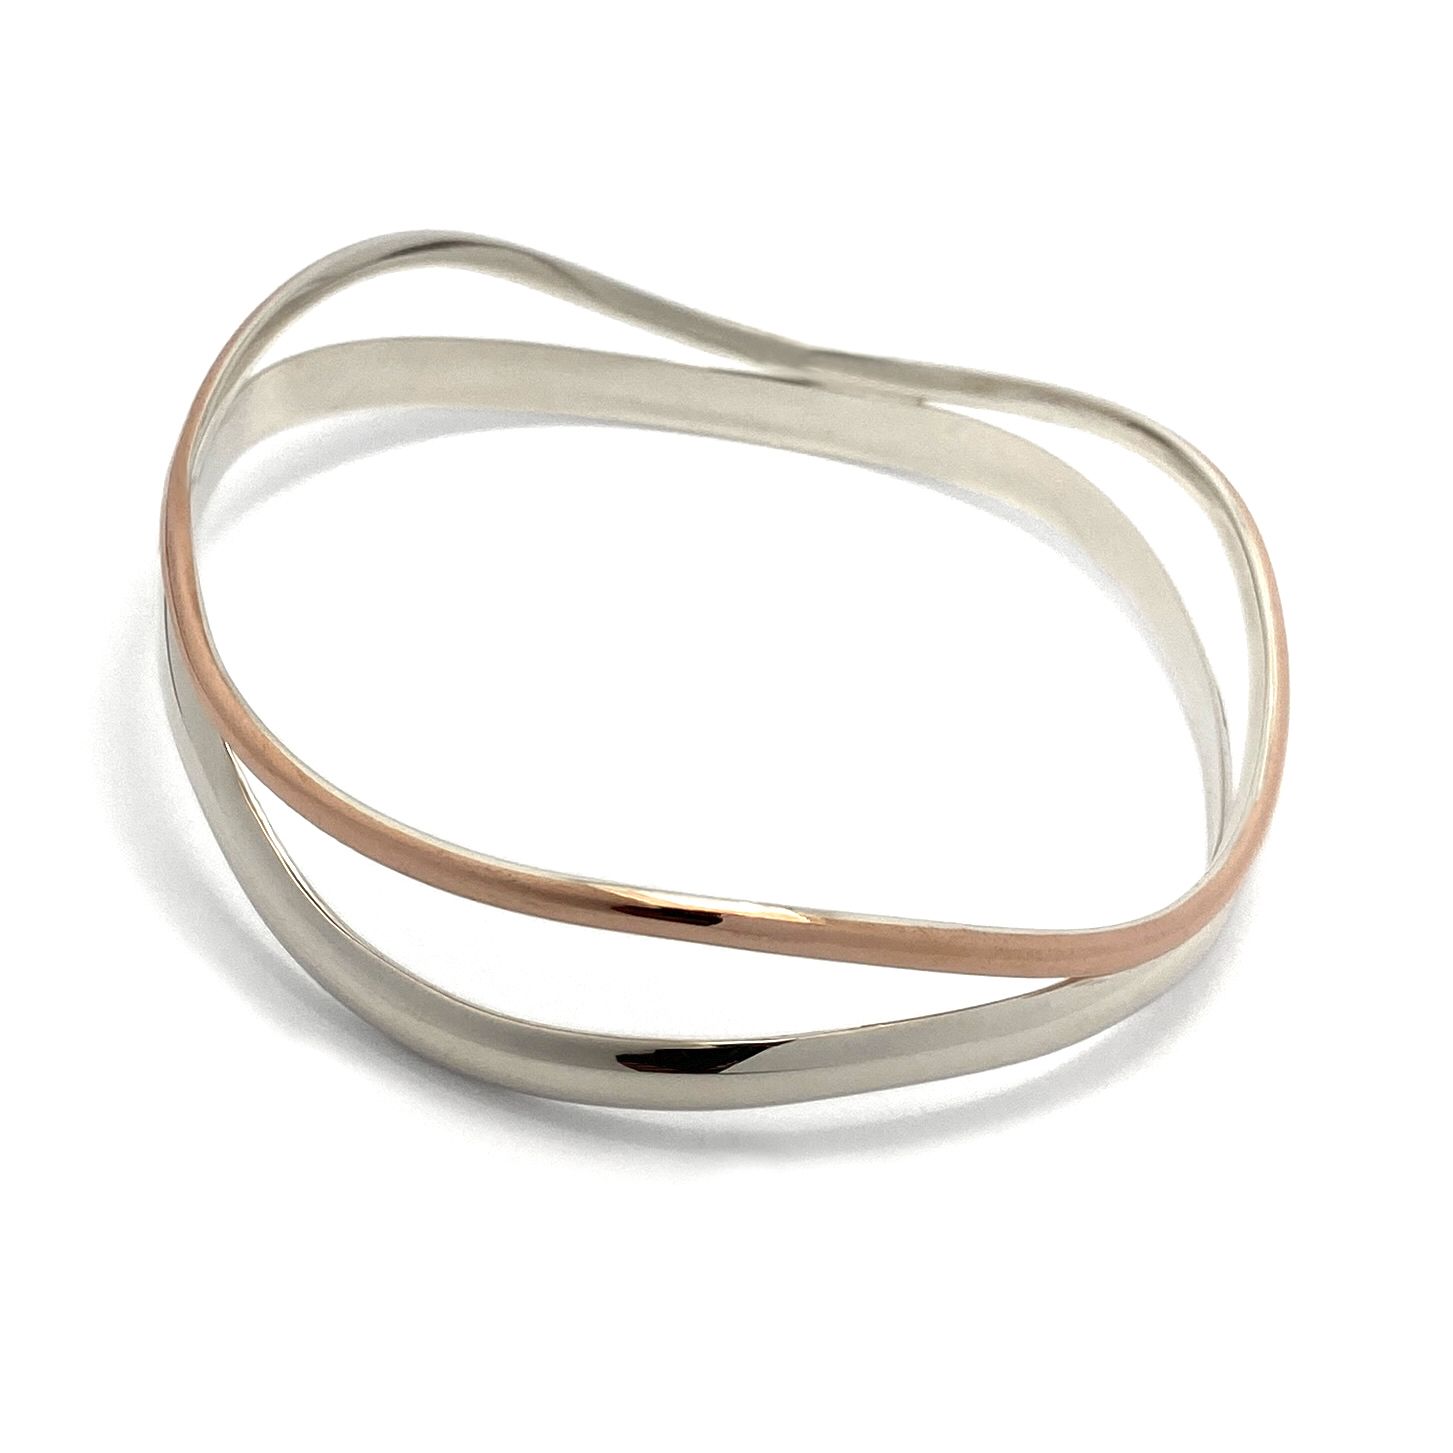 Claudine Moncion: Double Curved Bangle Product Image 1 of 1